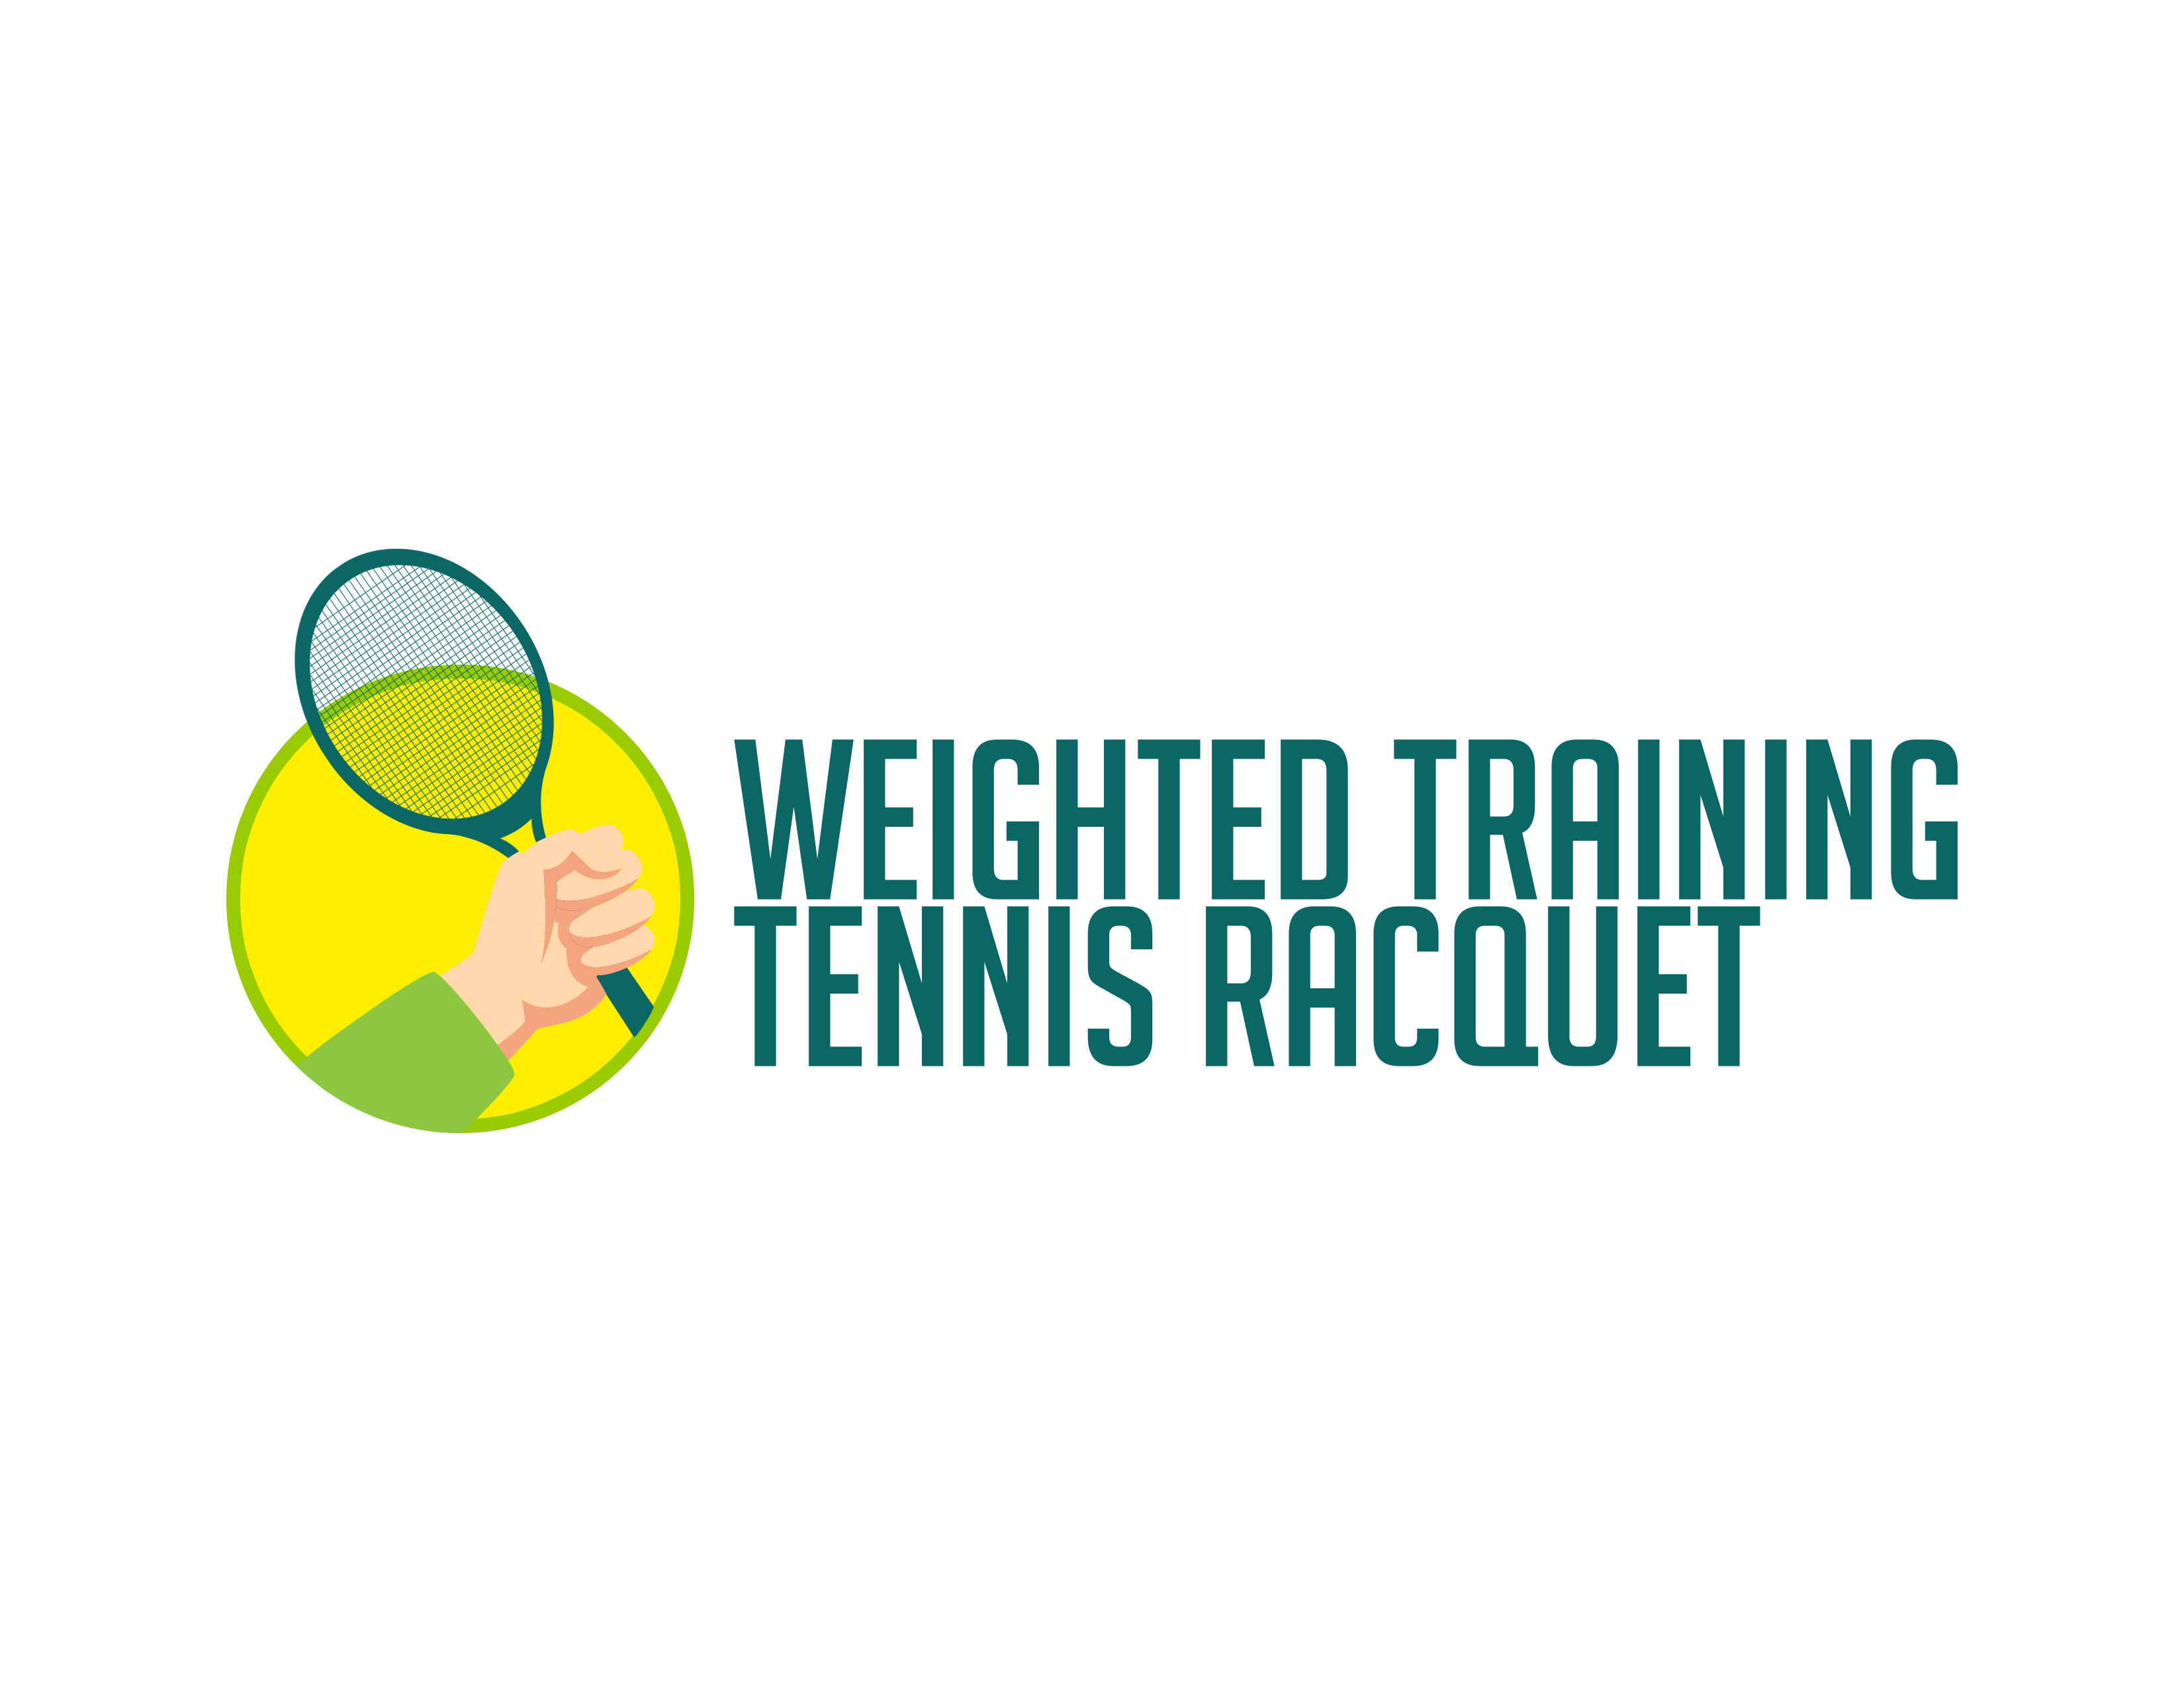 Once the player removes the weights, they will be able to much more easily and effectively swing their racket.